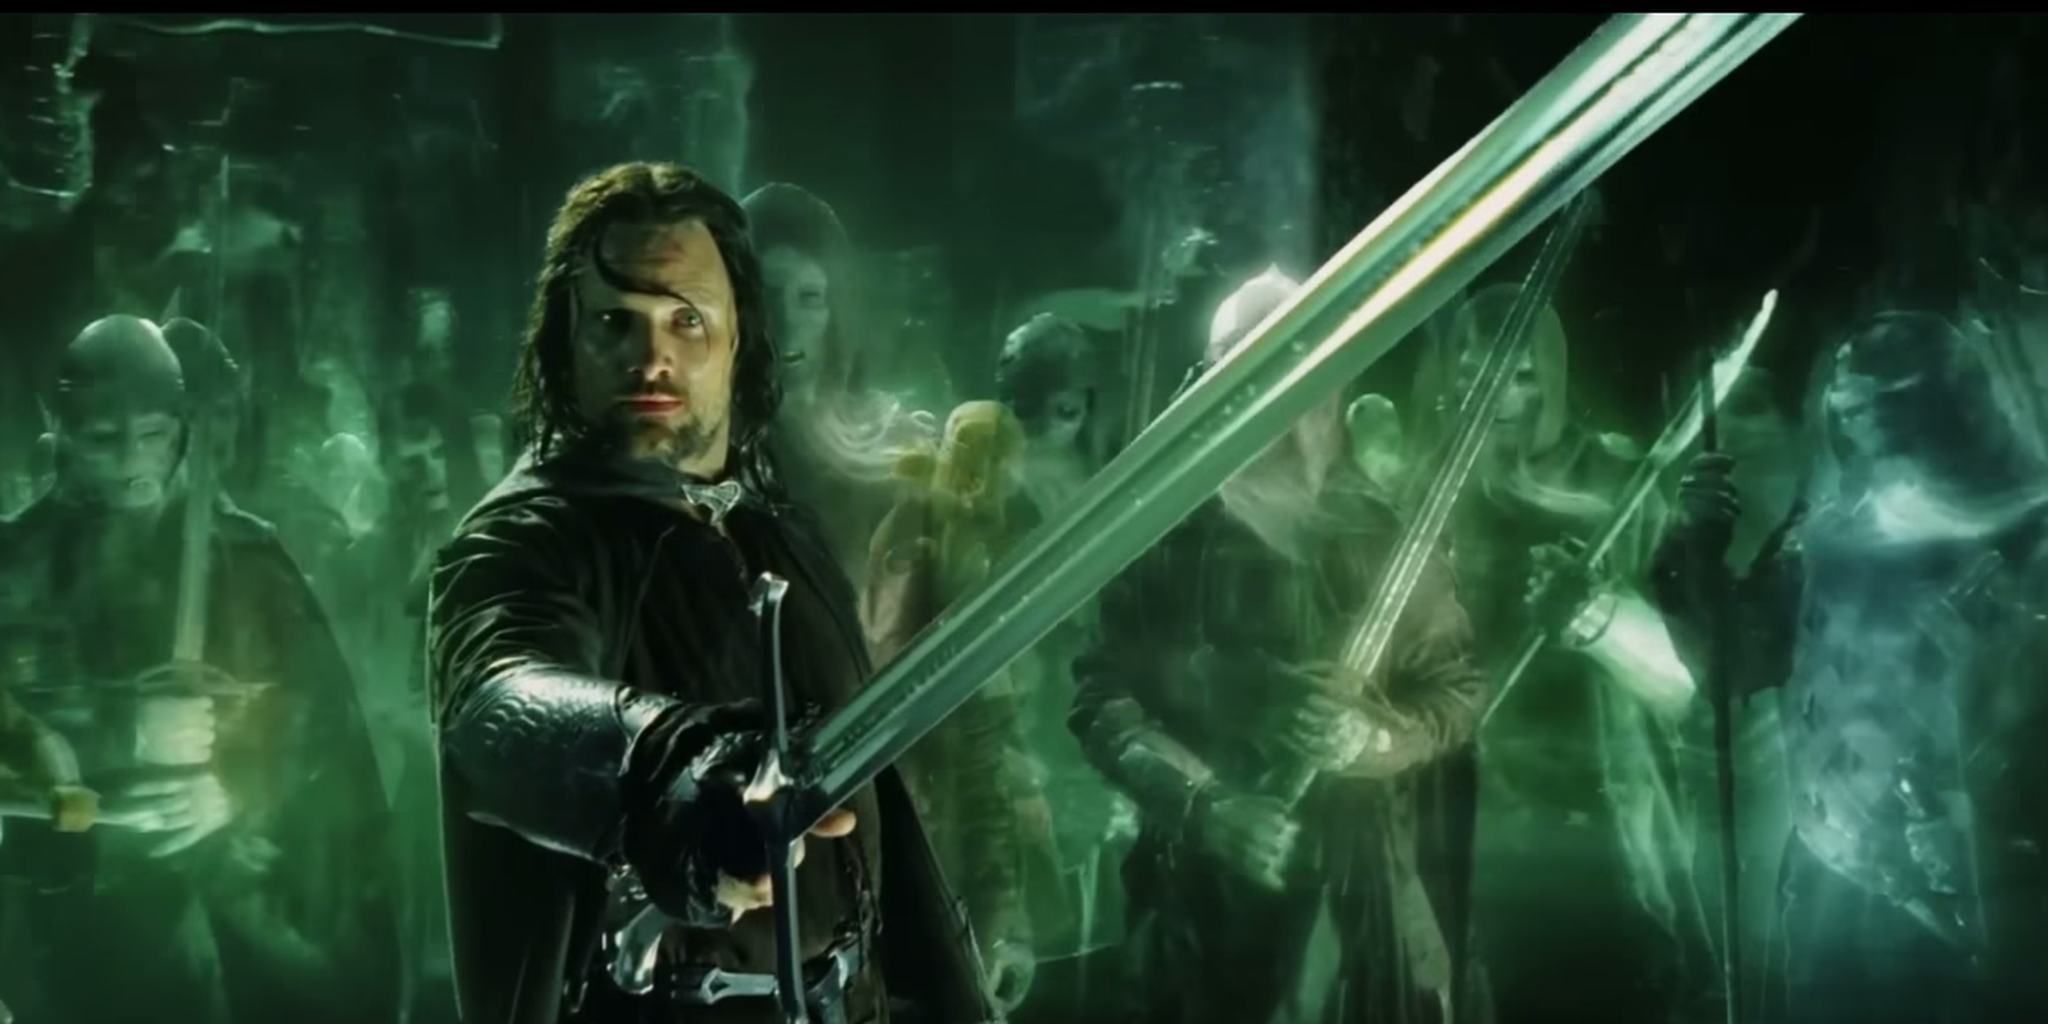 Aragorn points the Andruil sword